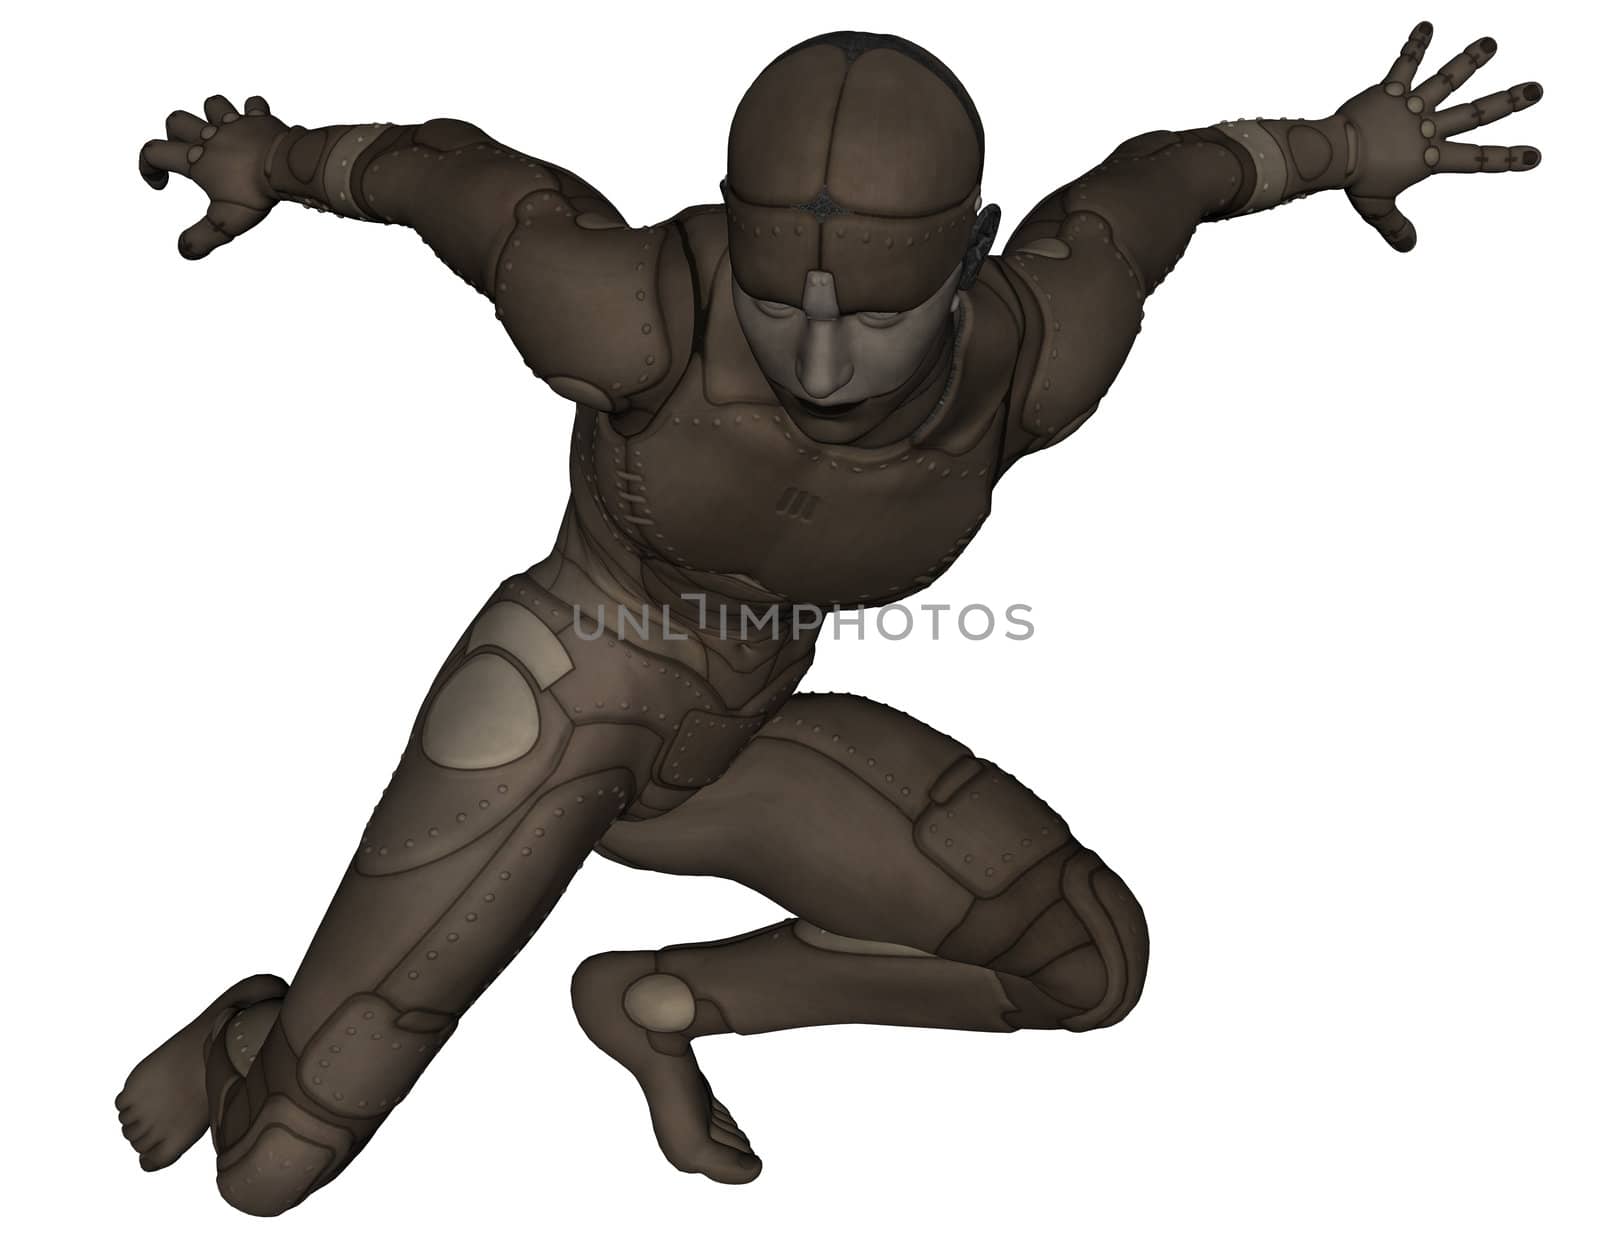 3D rendered scifi titanium man on white background isolated